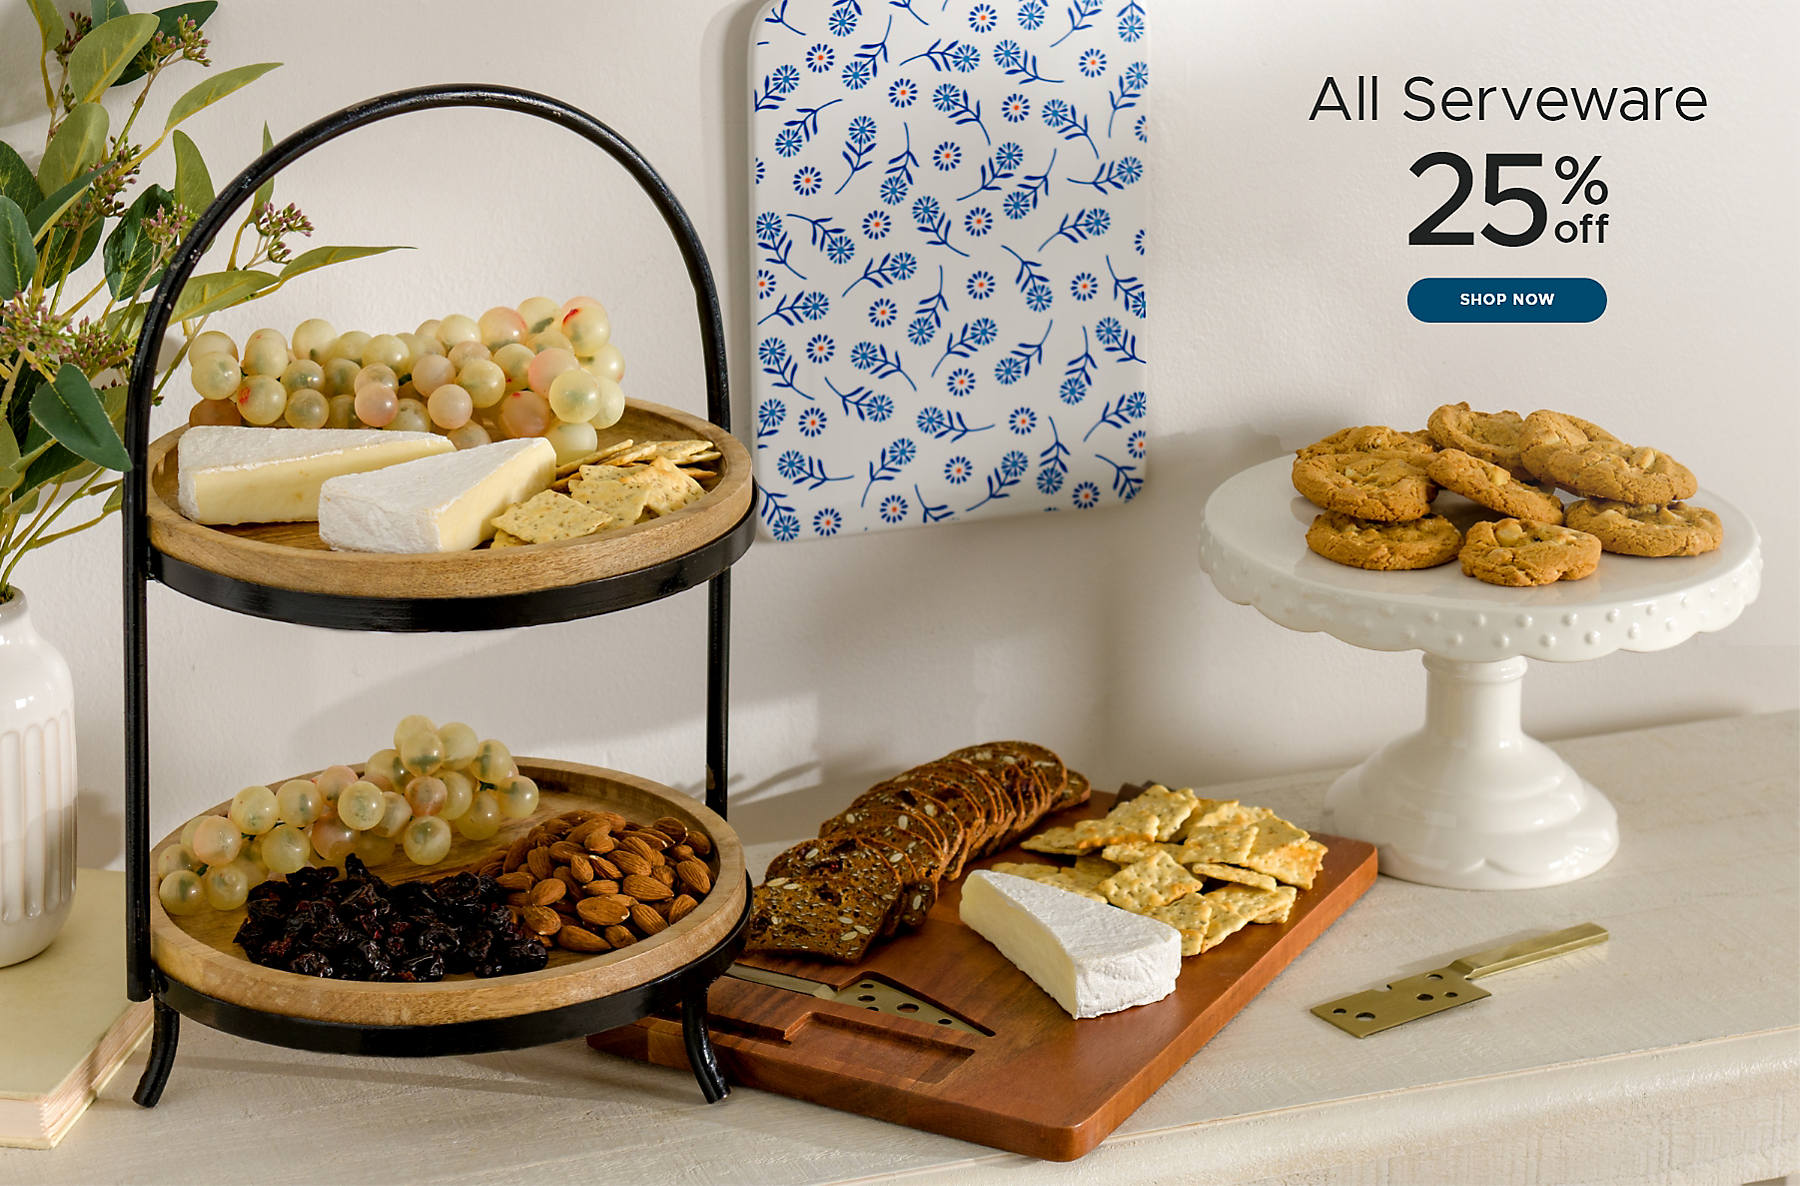 All Serveware 25% off shop now